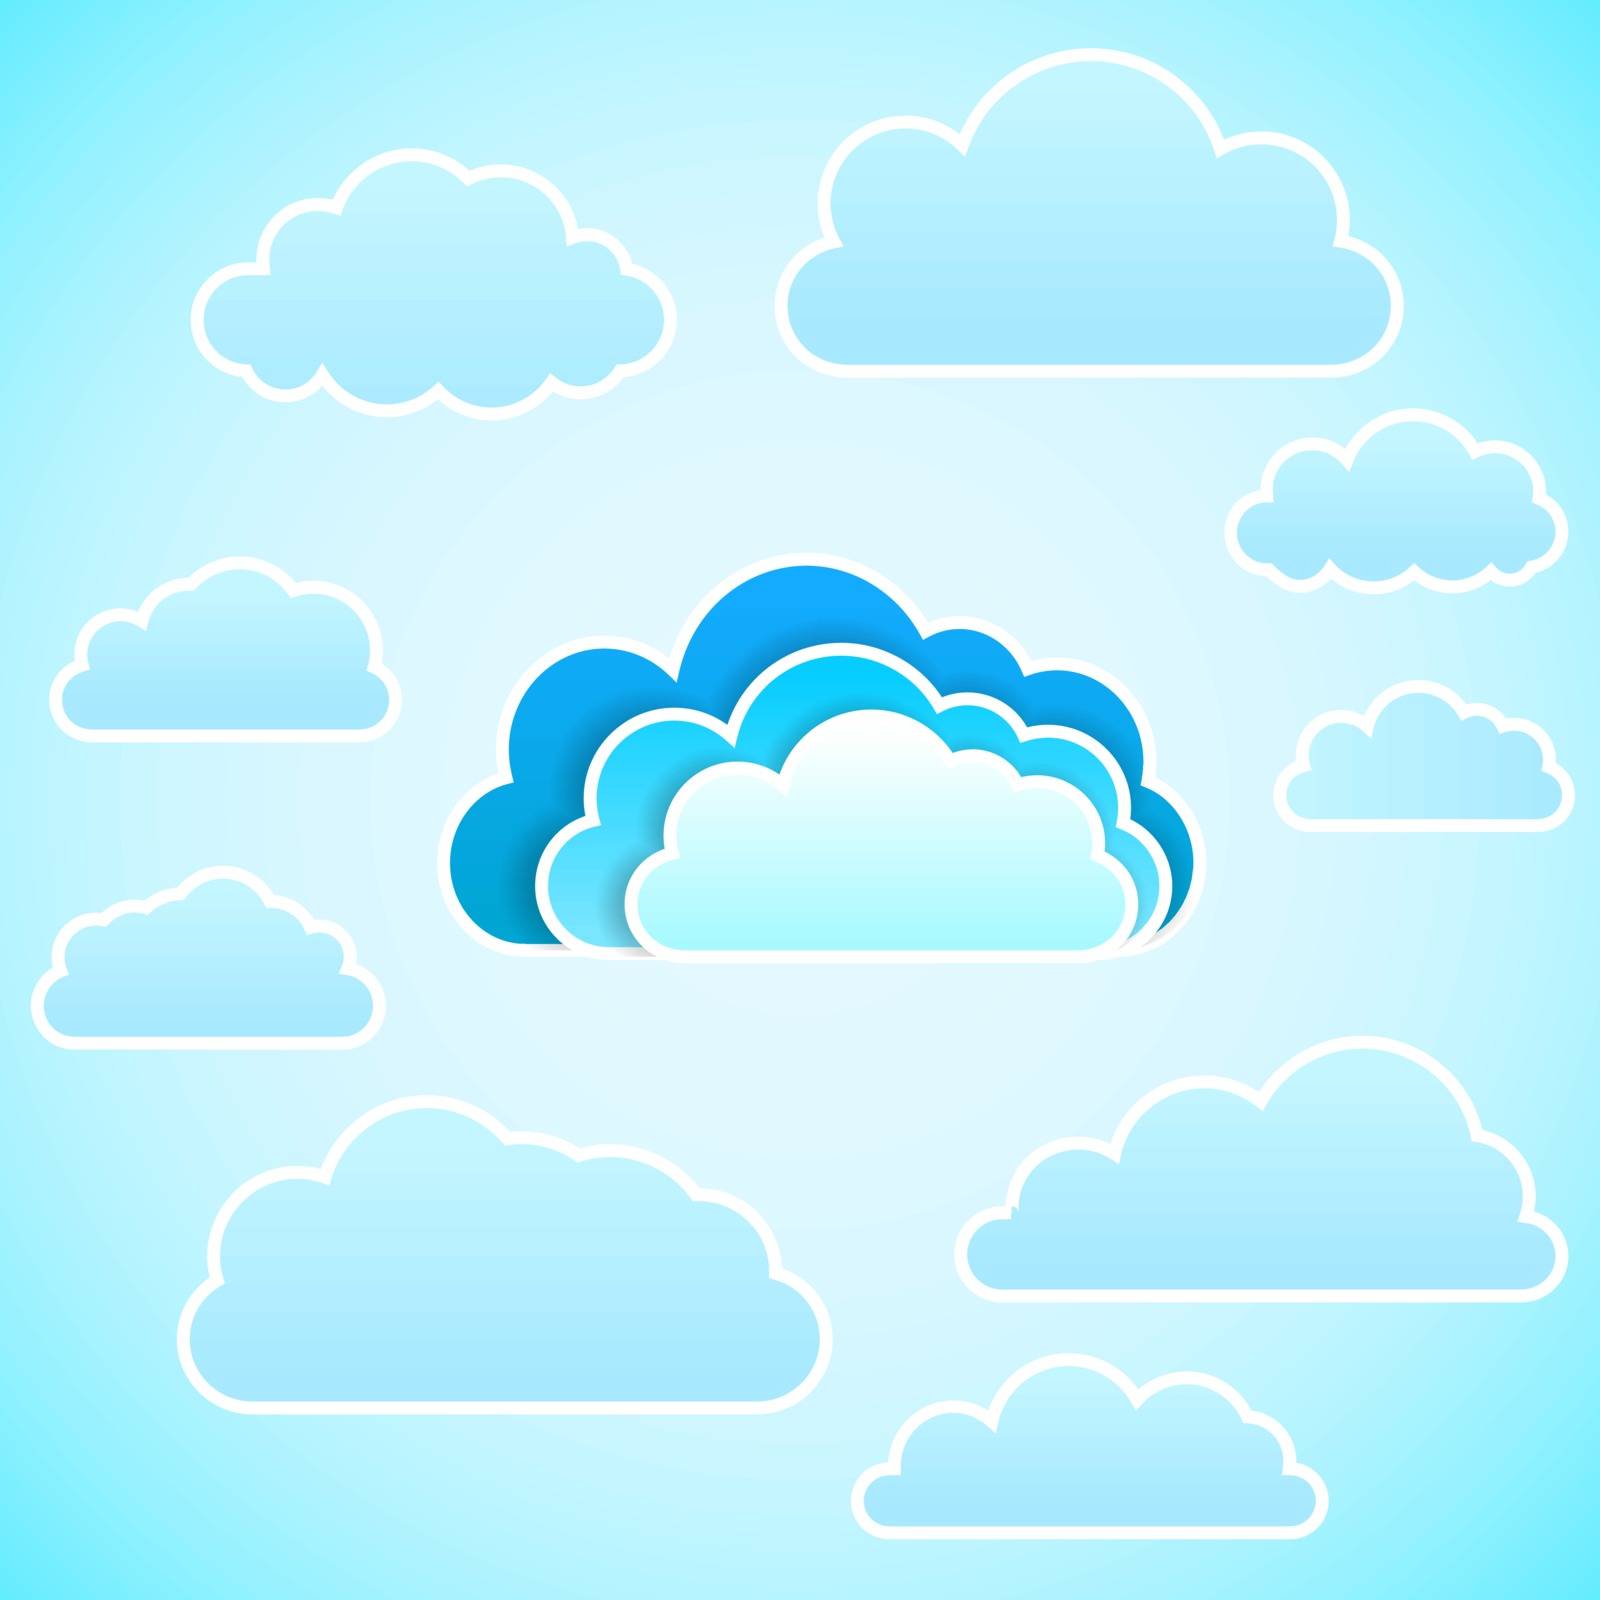 Cloud  icon. Vector illustration by iunewind